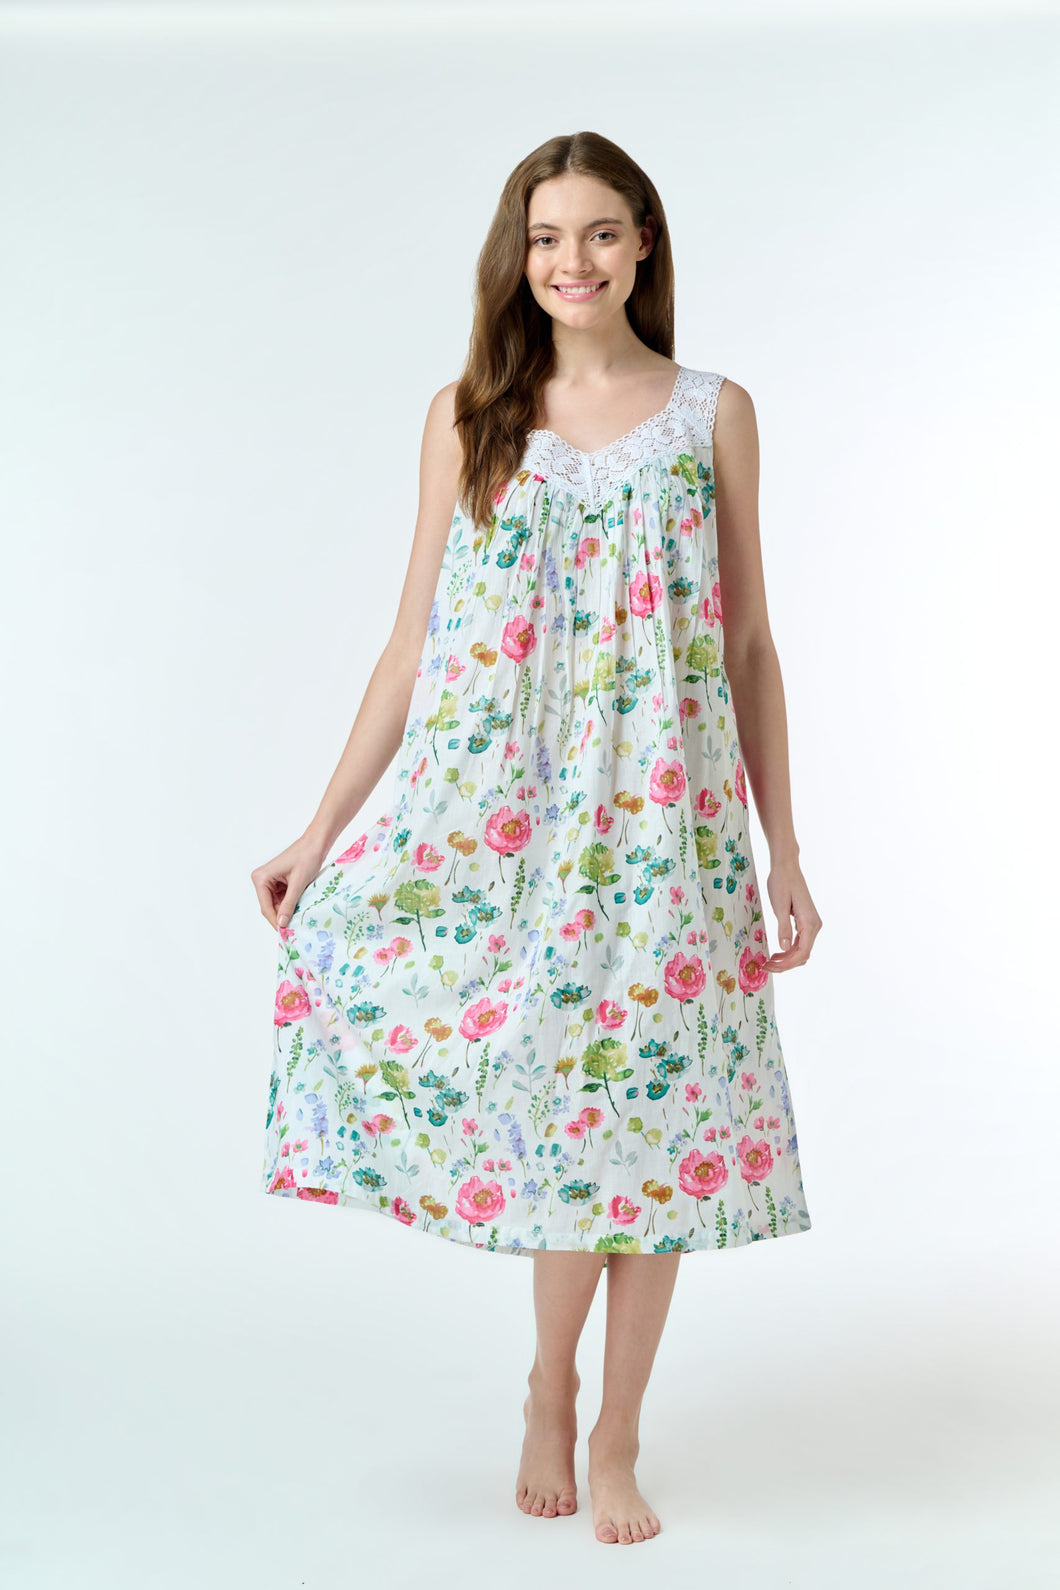 Arabella White with Floral Print Laced V Neck Nightie